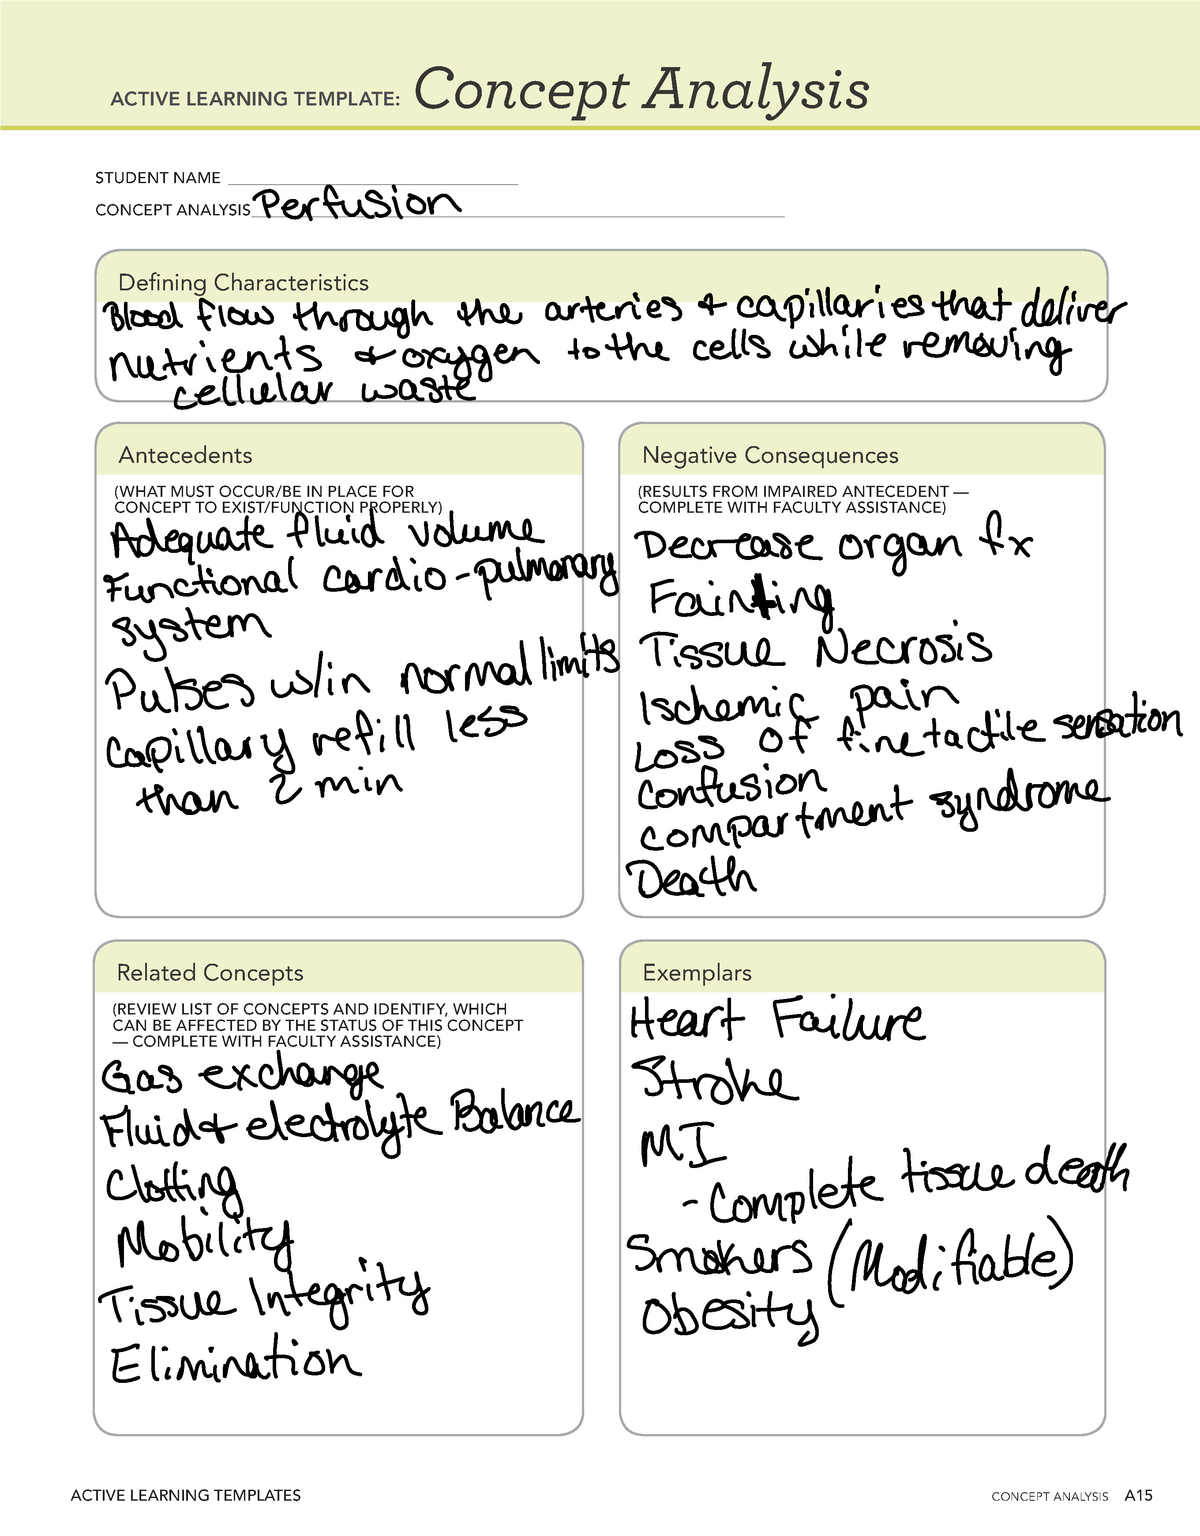 ati-4-template-active-learning-templates-concept-analysis-a-concept